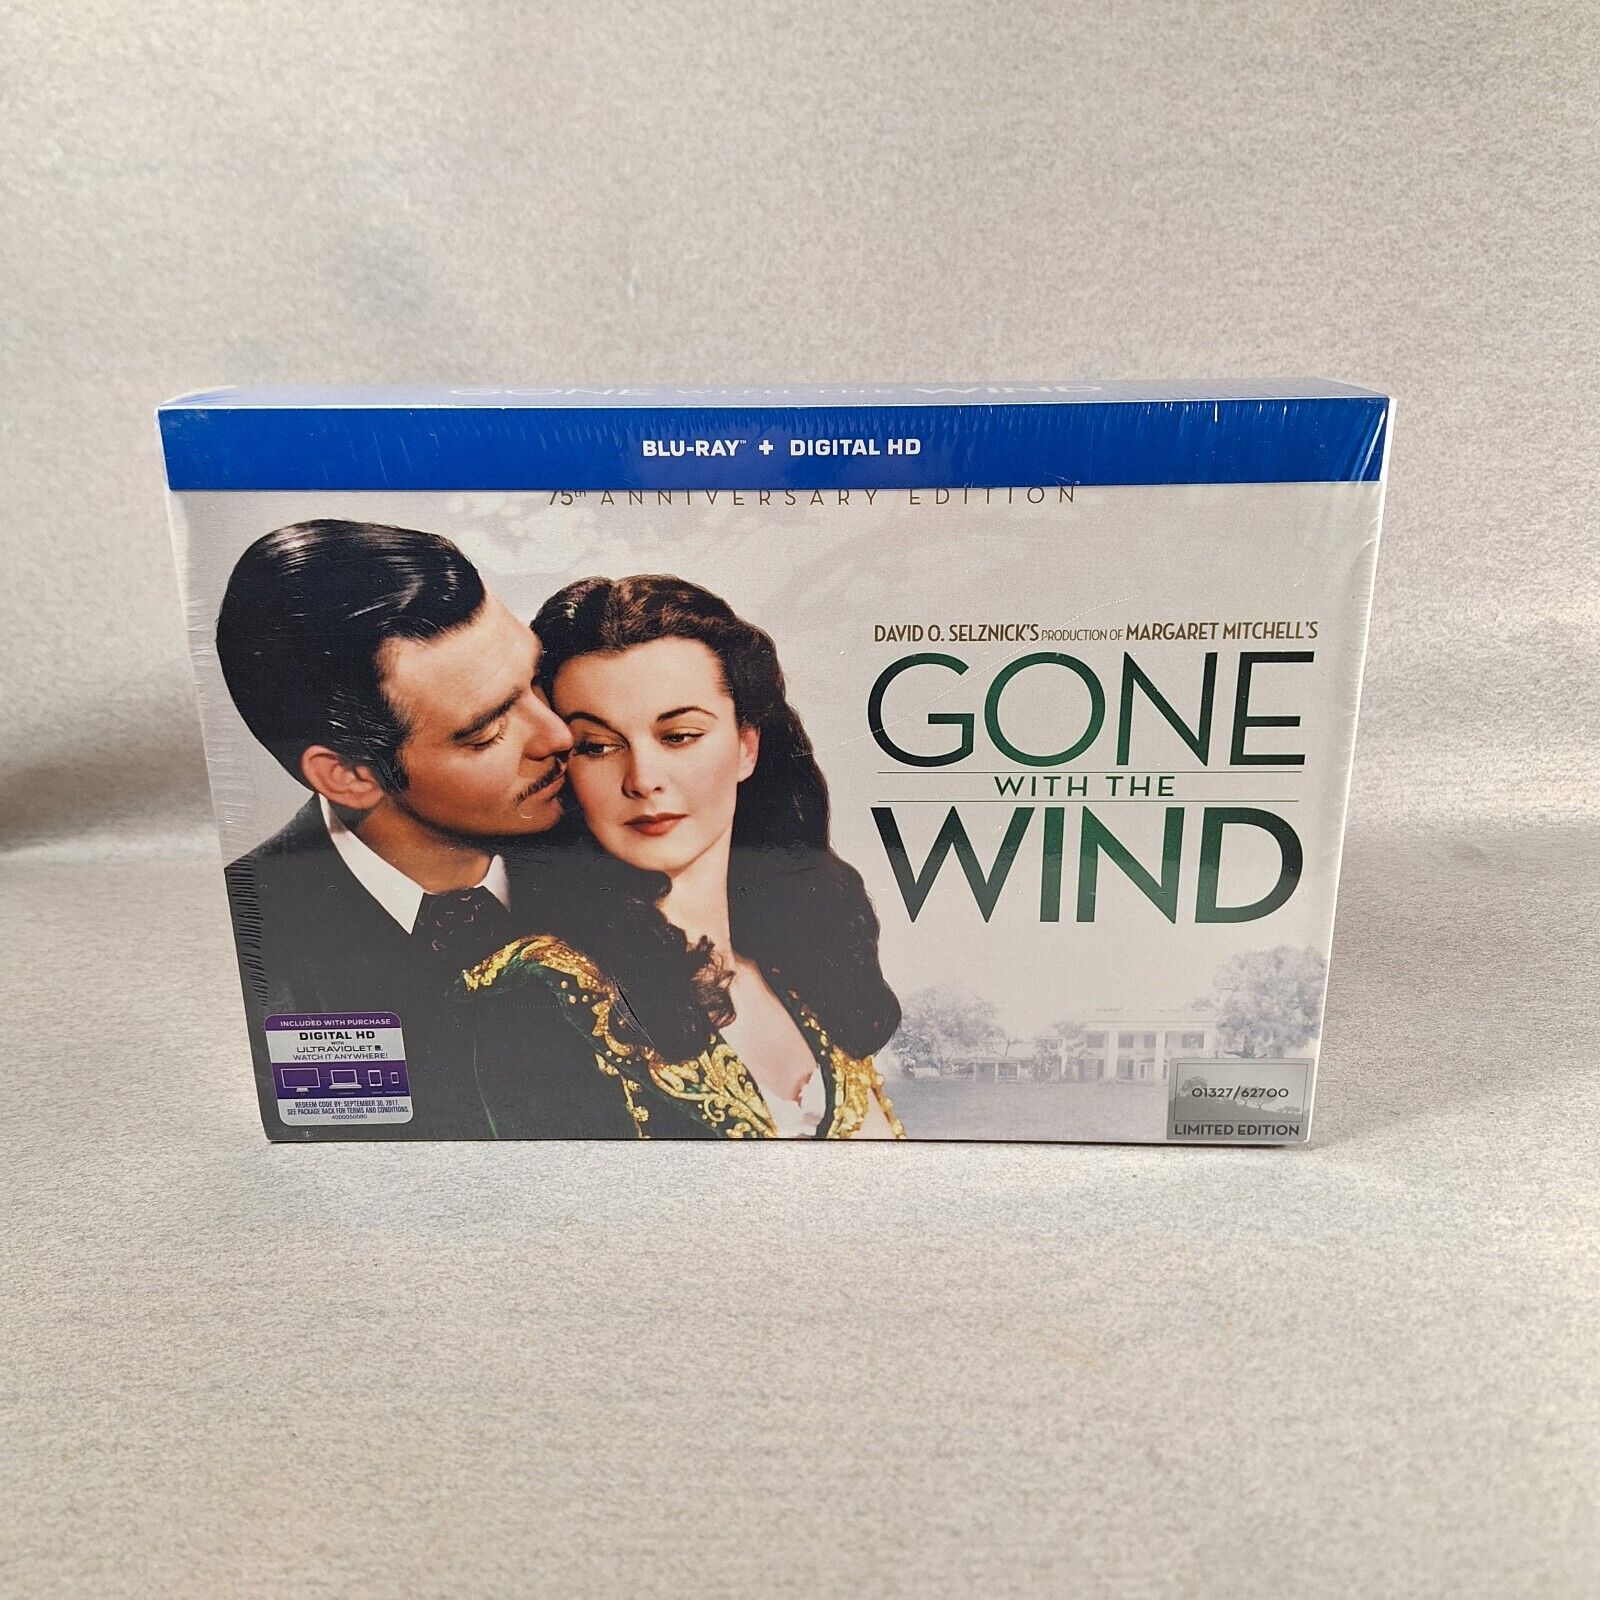 Gone With the Wind (Blu-ray Disc, 2014, 75th Anniversary Includes Book) Limited